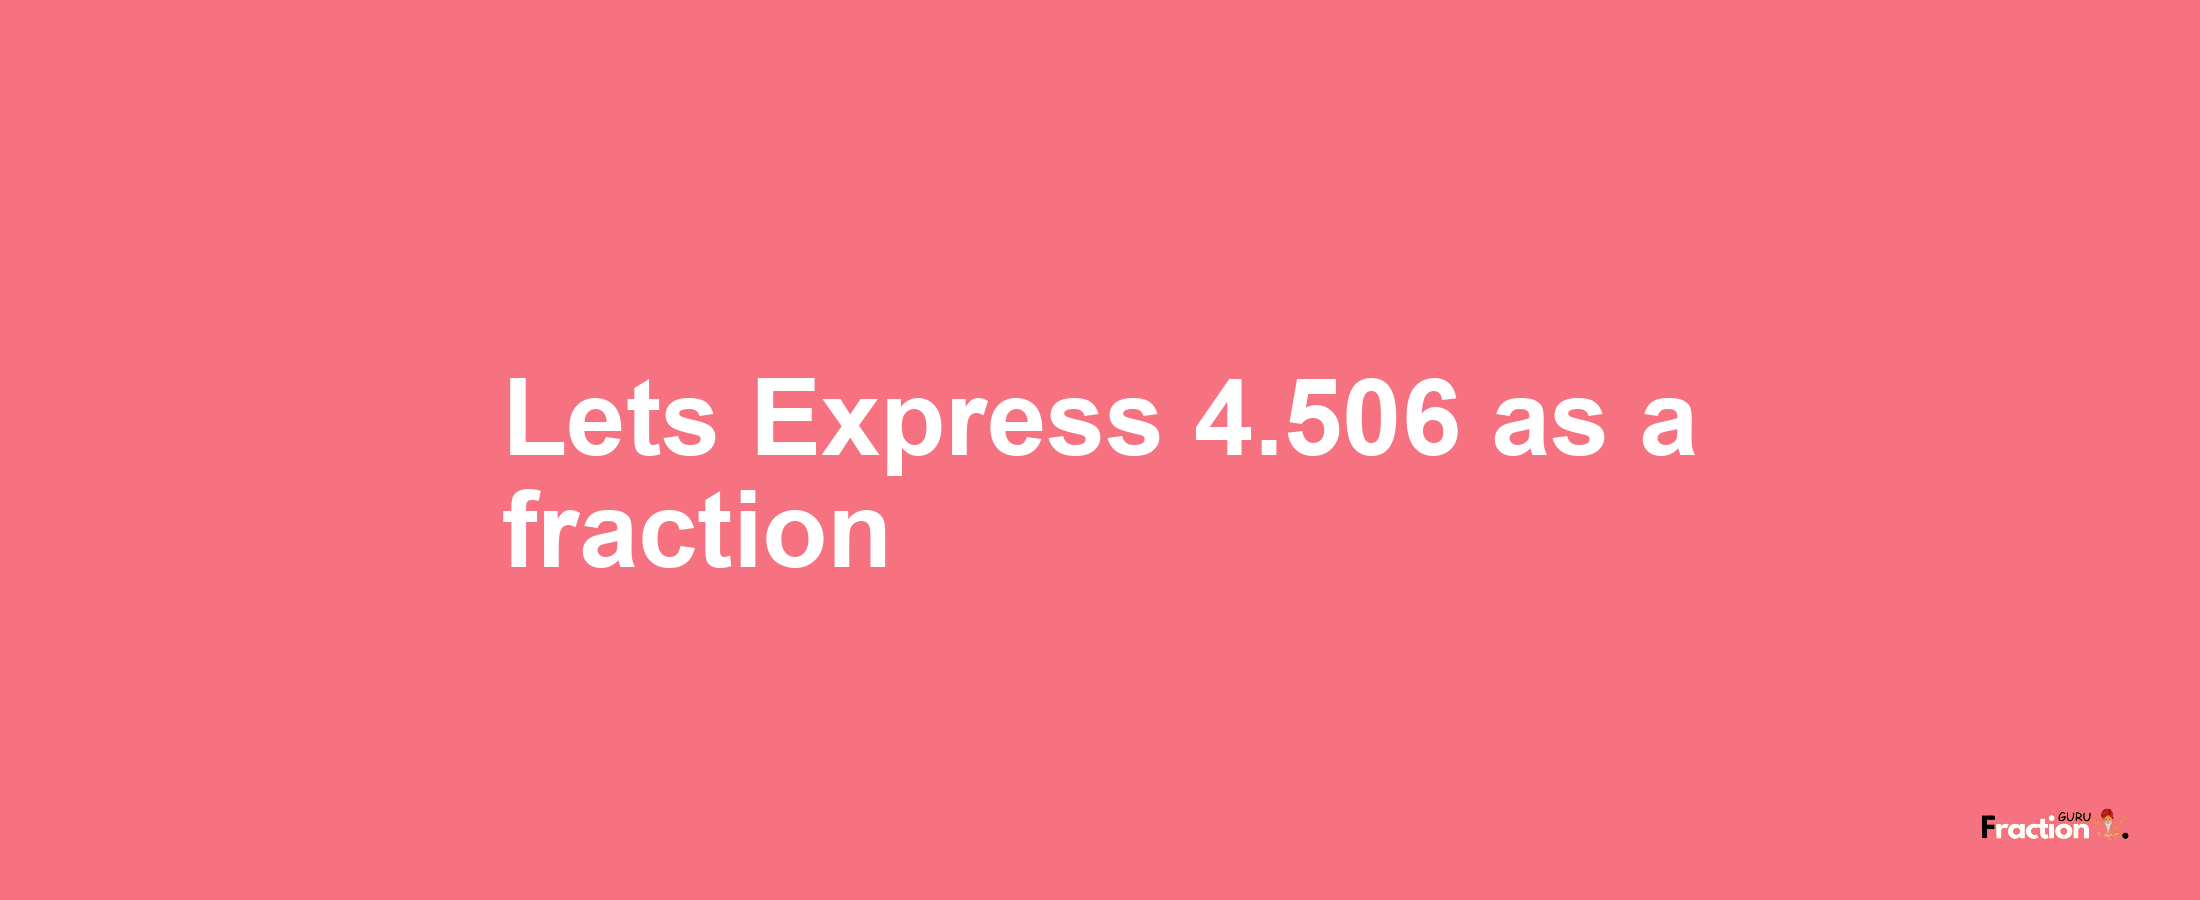 Lets Express 4.506 as afraction